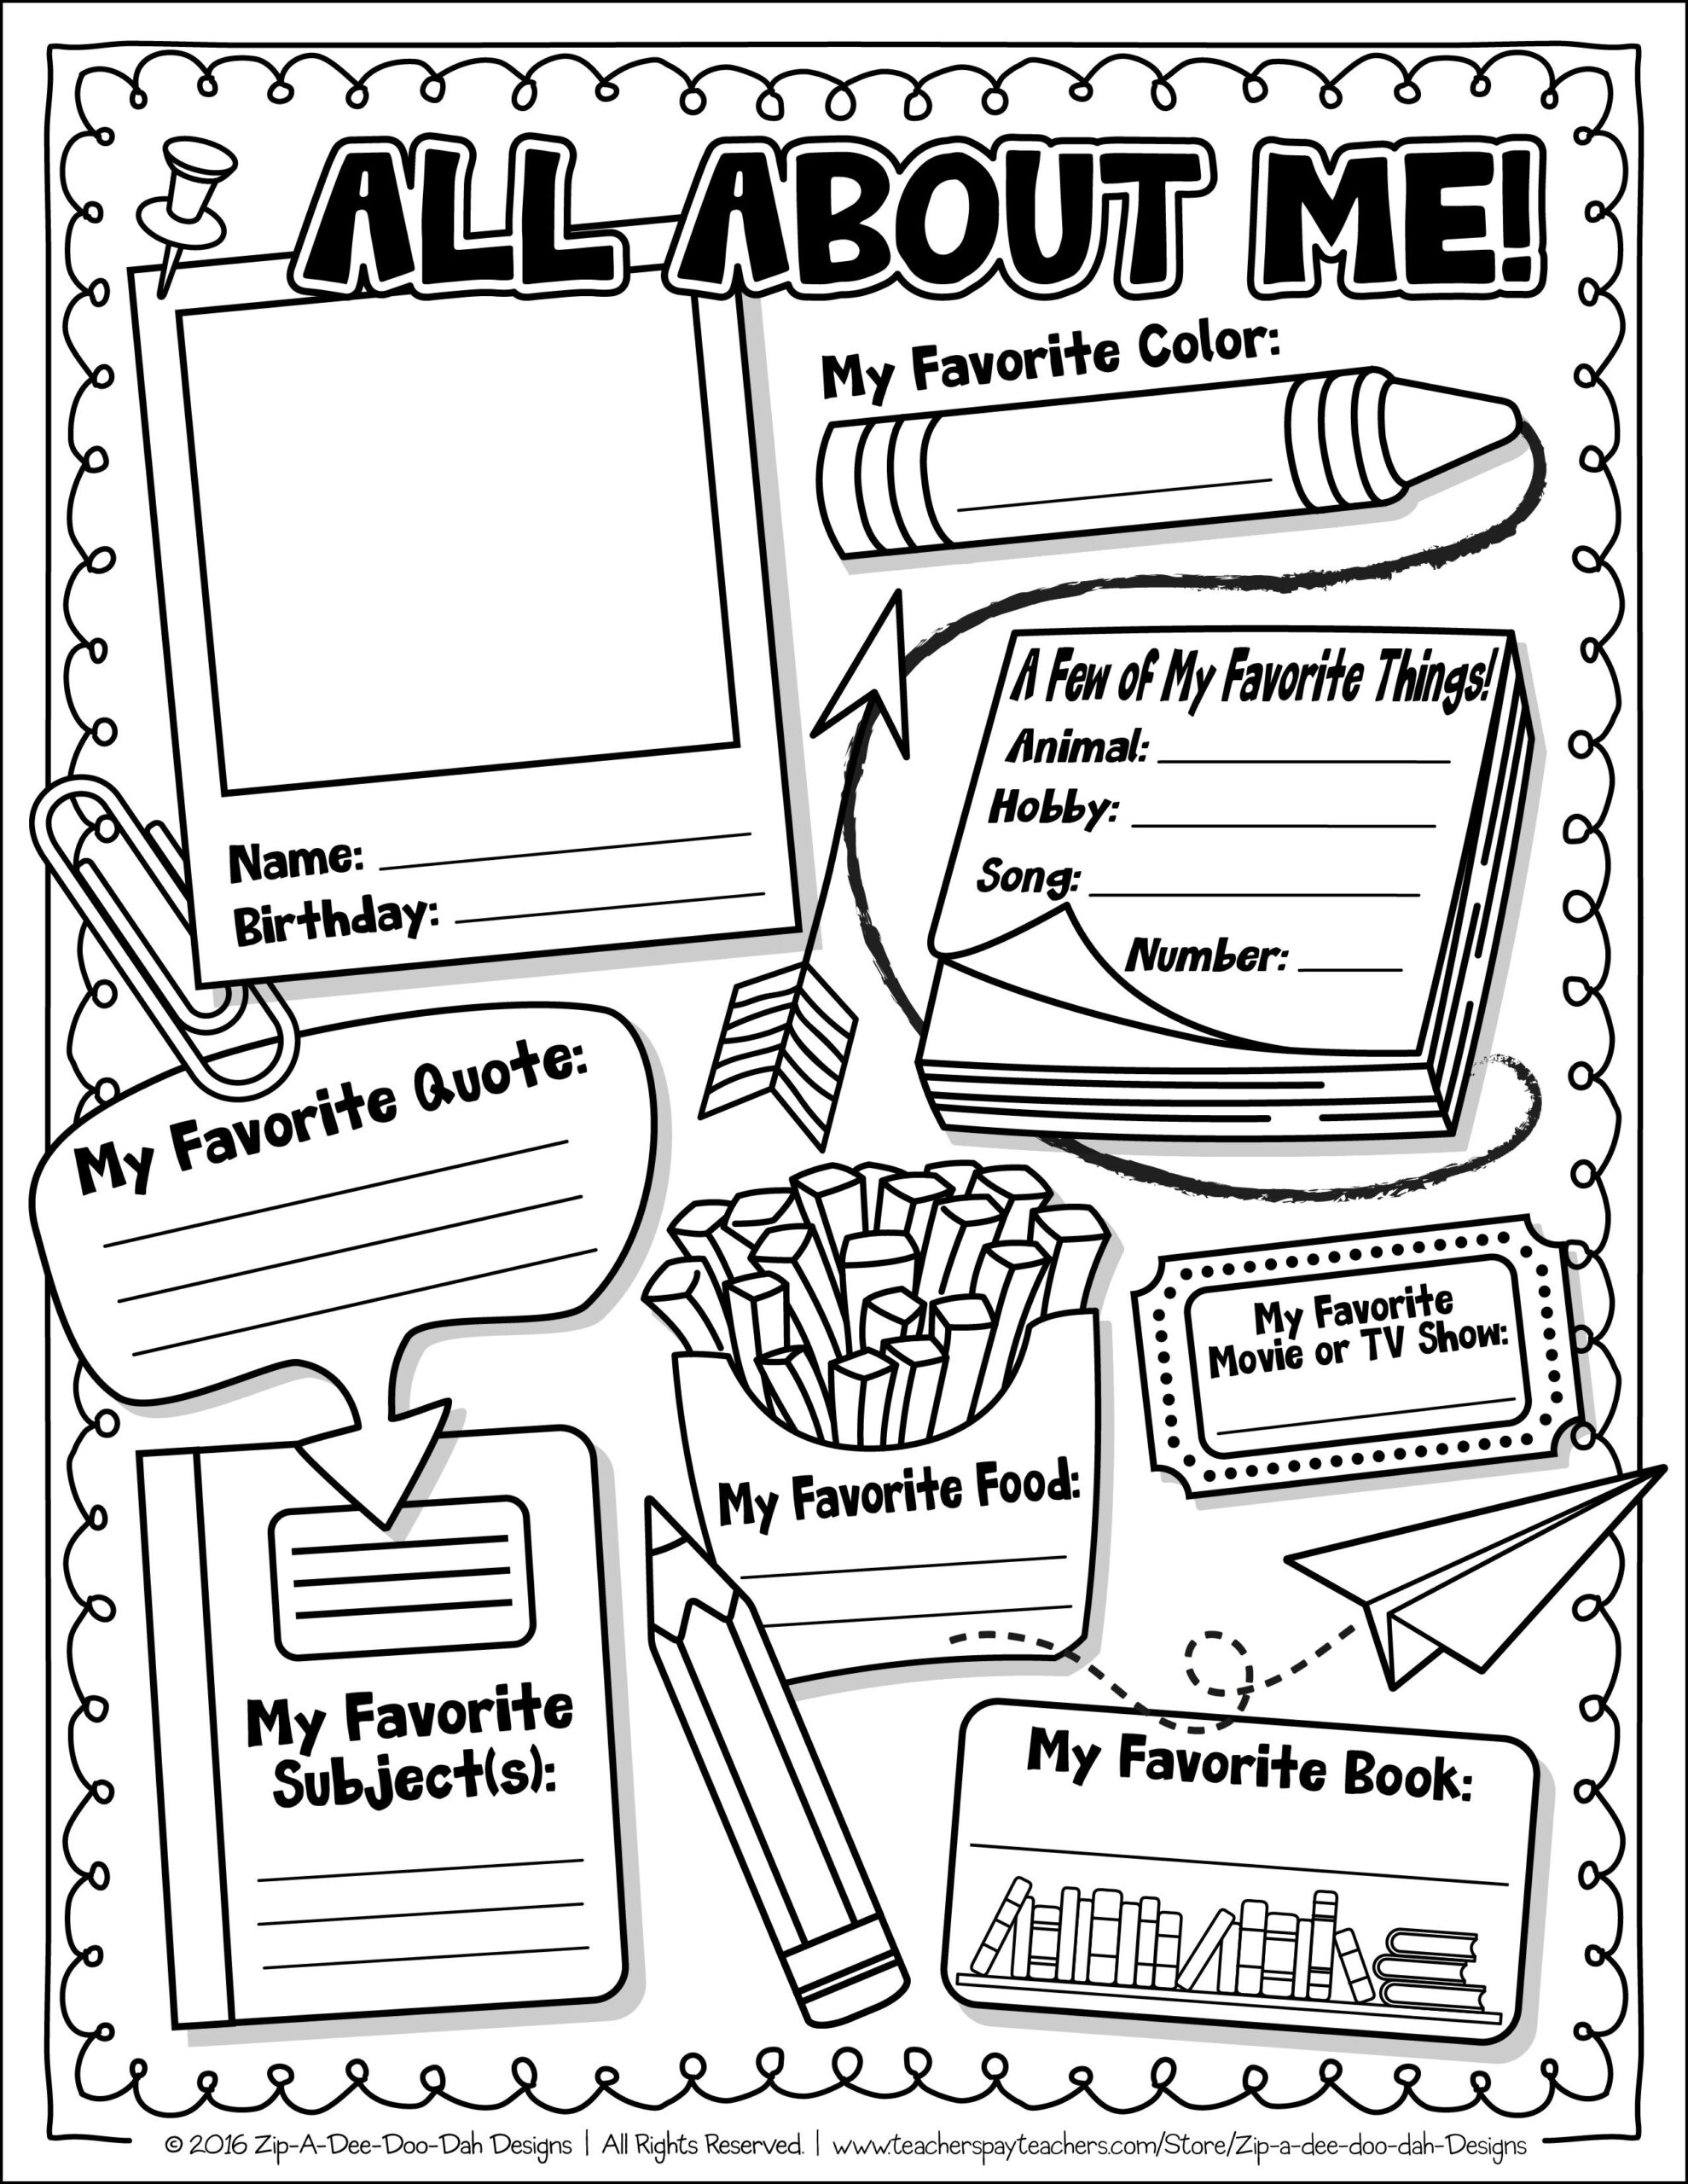  FREE All About Me Activity Worksheet First Day Of School Activities 